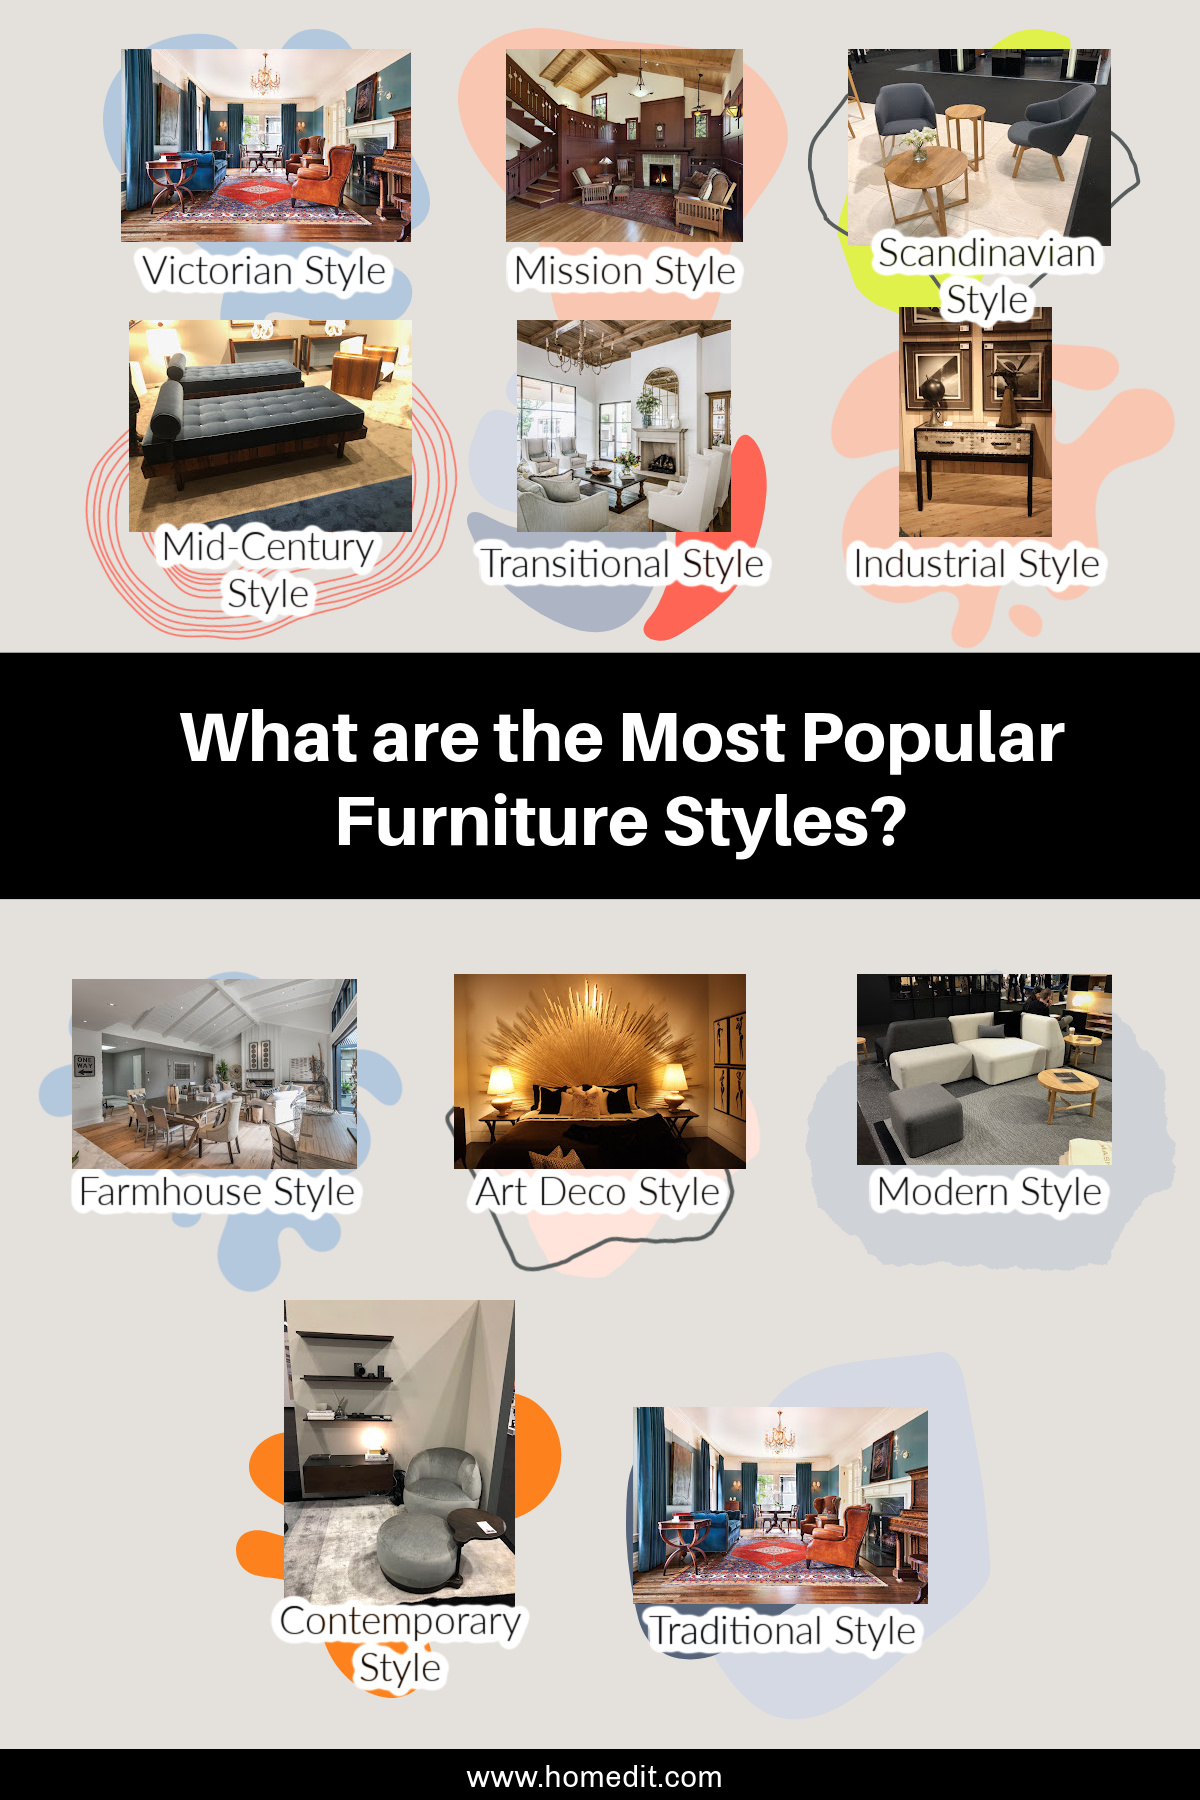 What are the Most Popular Furniture Styles?